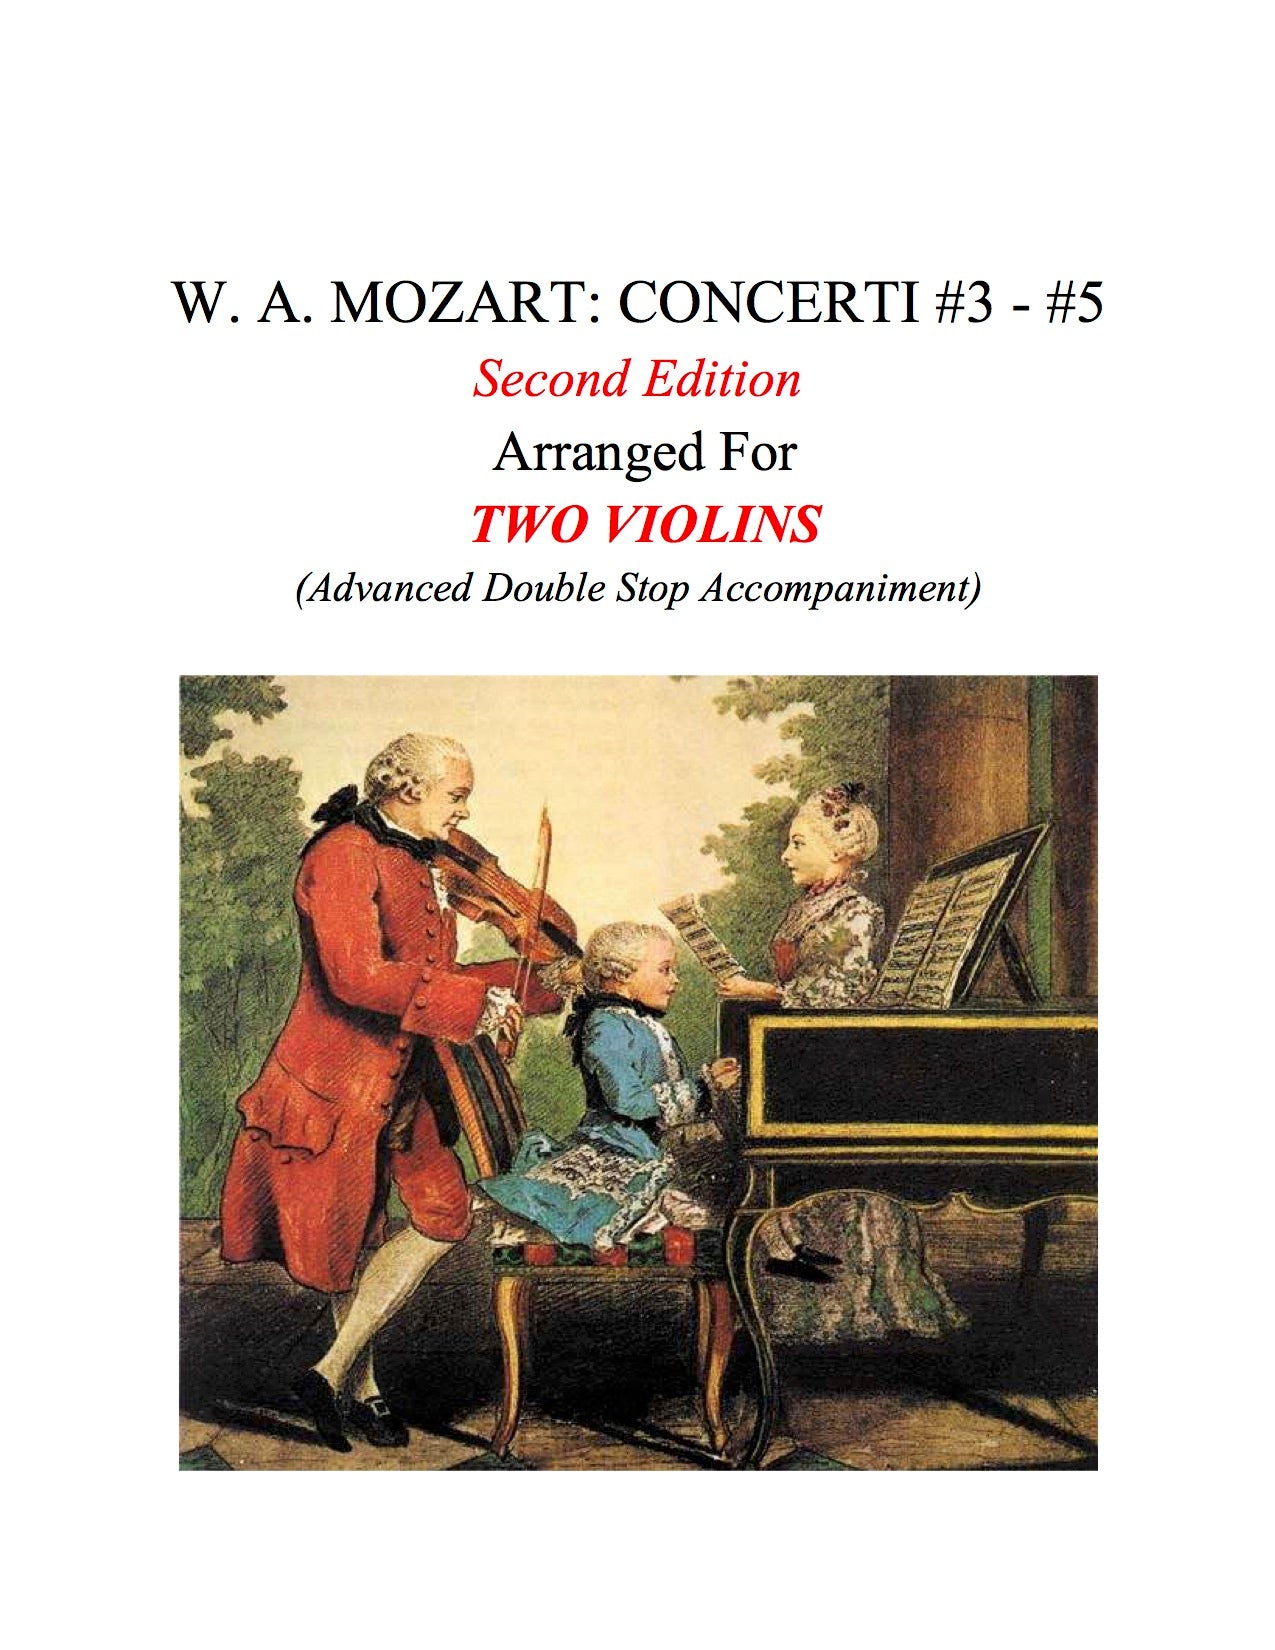 060B - W. A. MOZART: CONCERTI #3-#5: Second Edition (Double Stop Acc. with Digital Score)